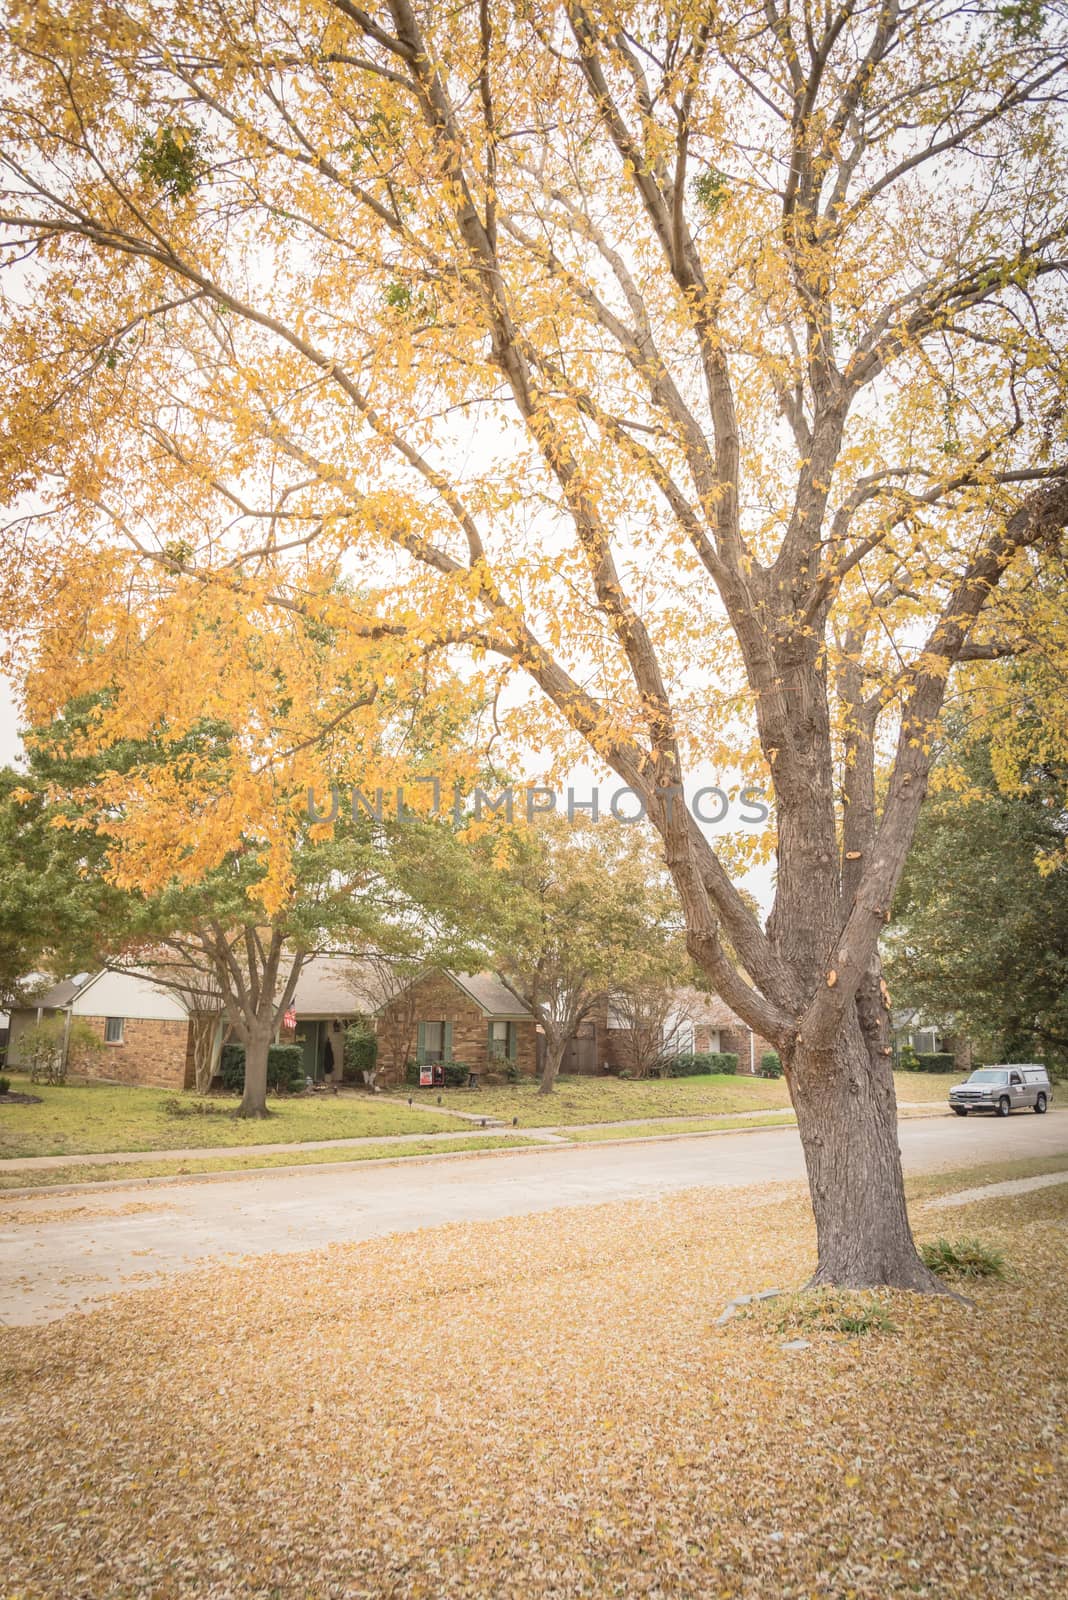 Fallen autumn leaves on front yard lawn and sidewalk of residential house in Dallas suburbs. Beautiful fall foliage with floor of dried maple leaves along quiet street with parked car in Texas, America